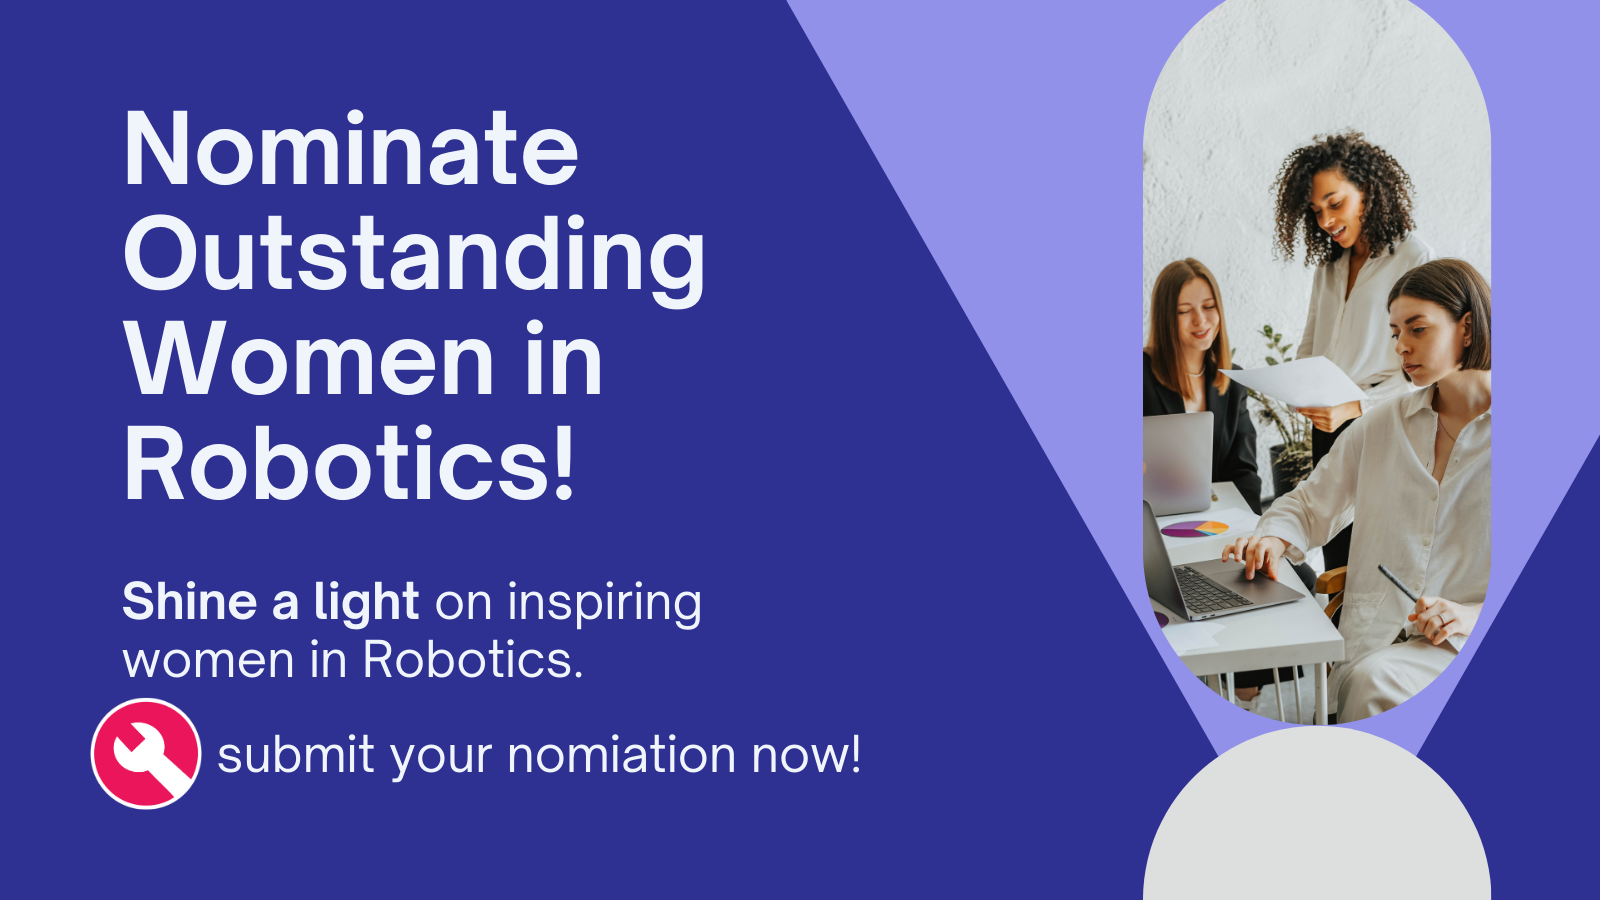 Women in Robotics You Need to Know About Annual List: Nominations